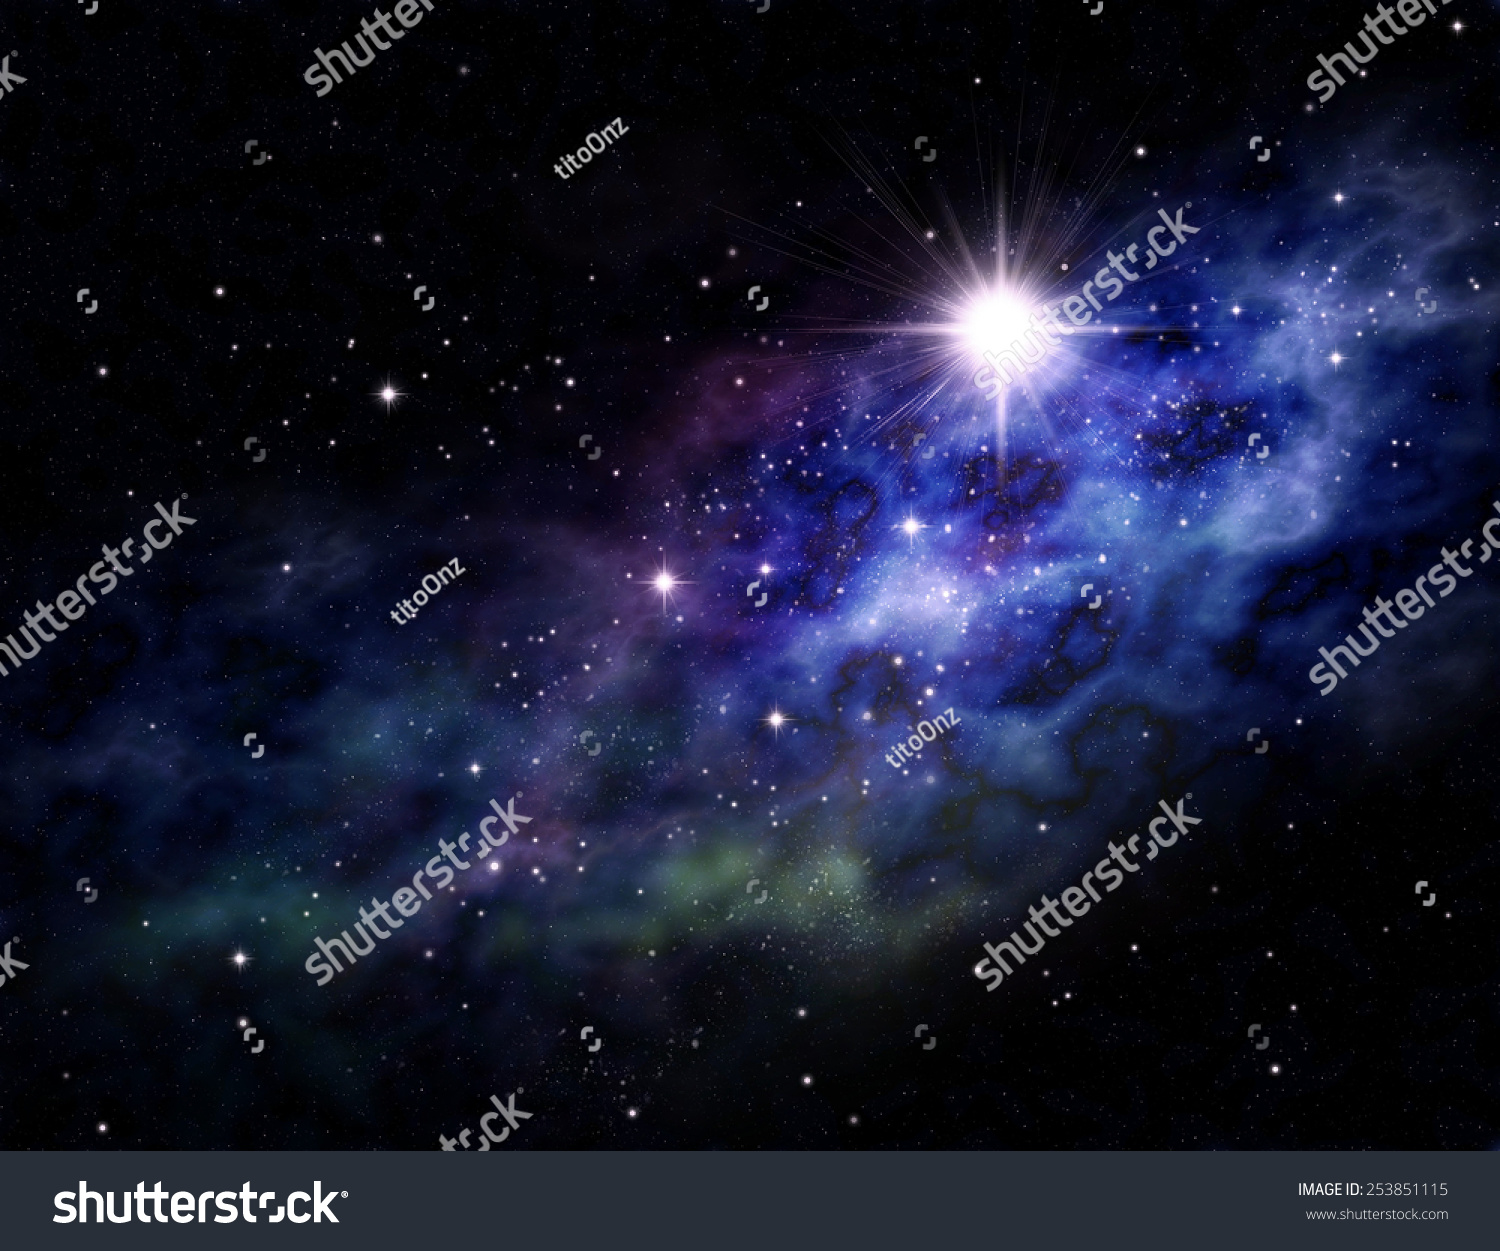 Imaginary background of deep space and star field